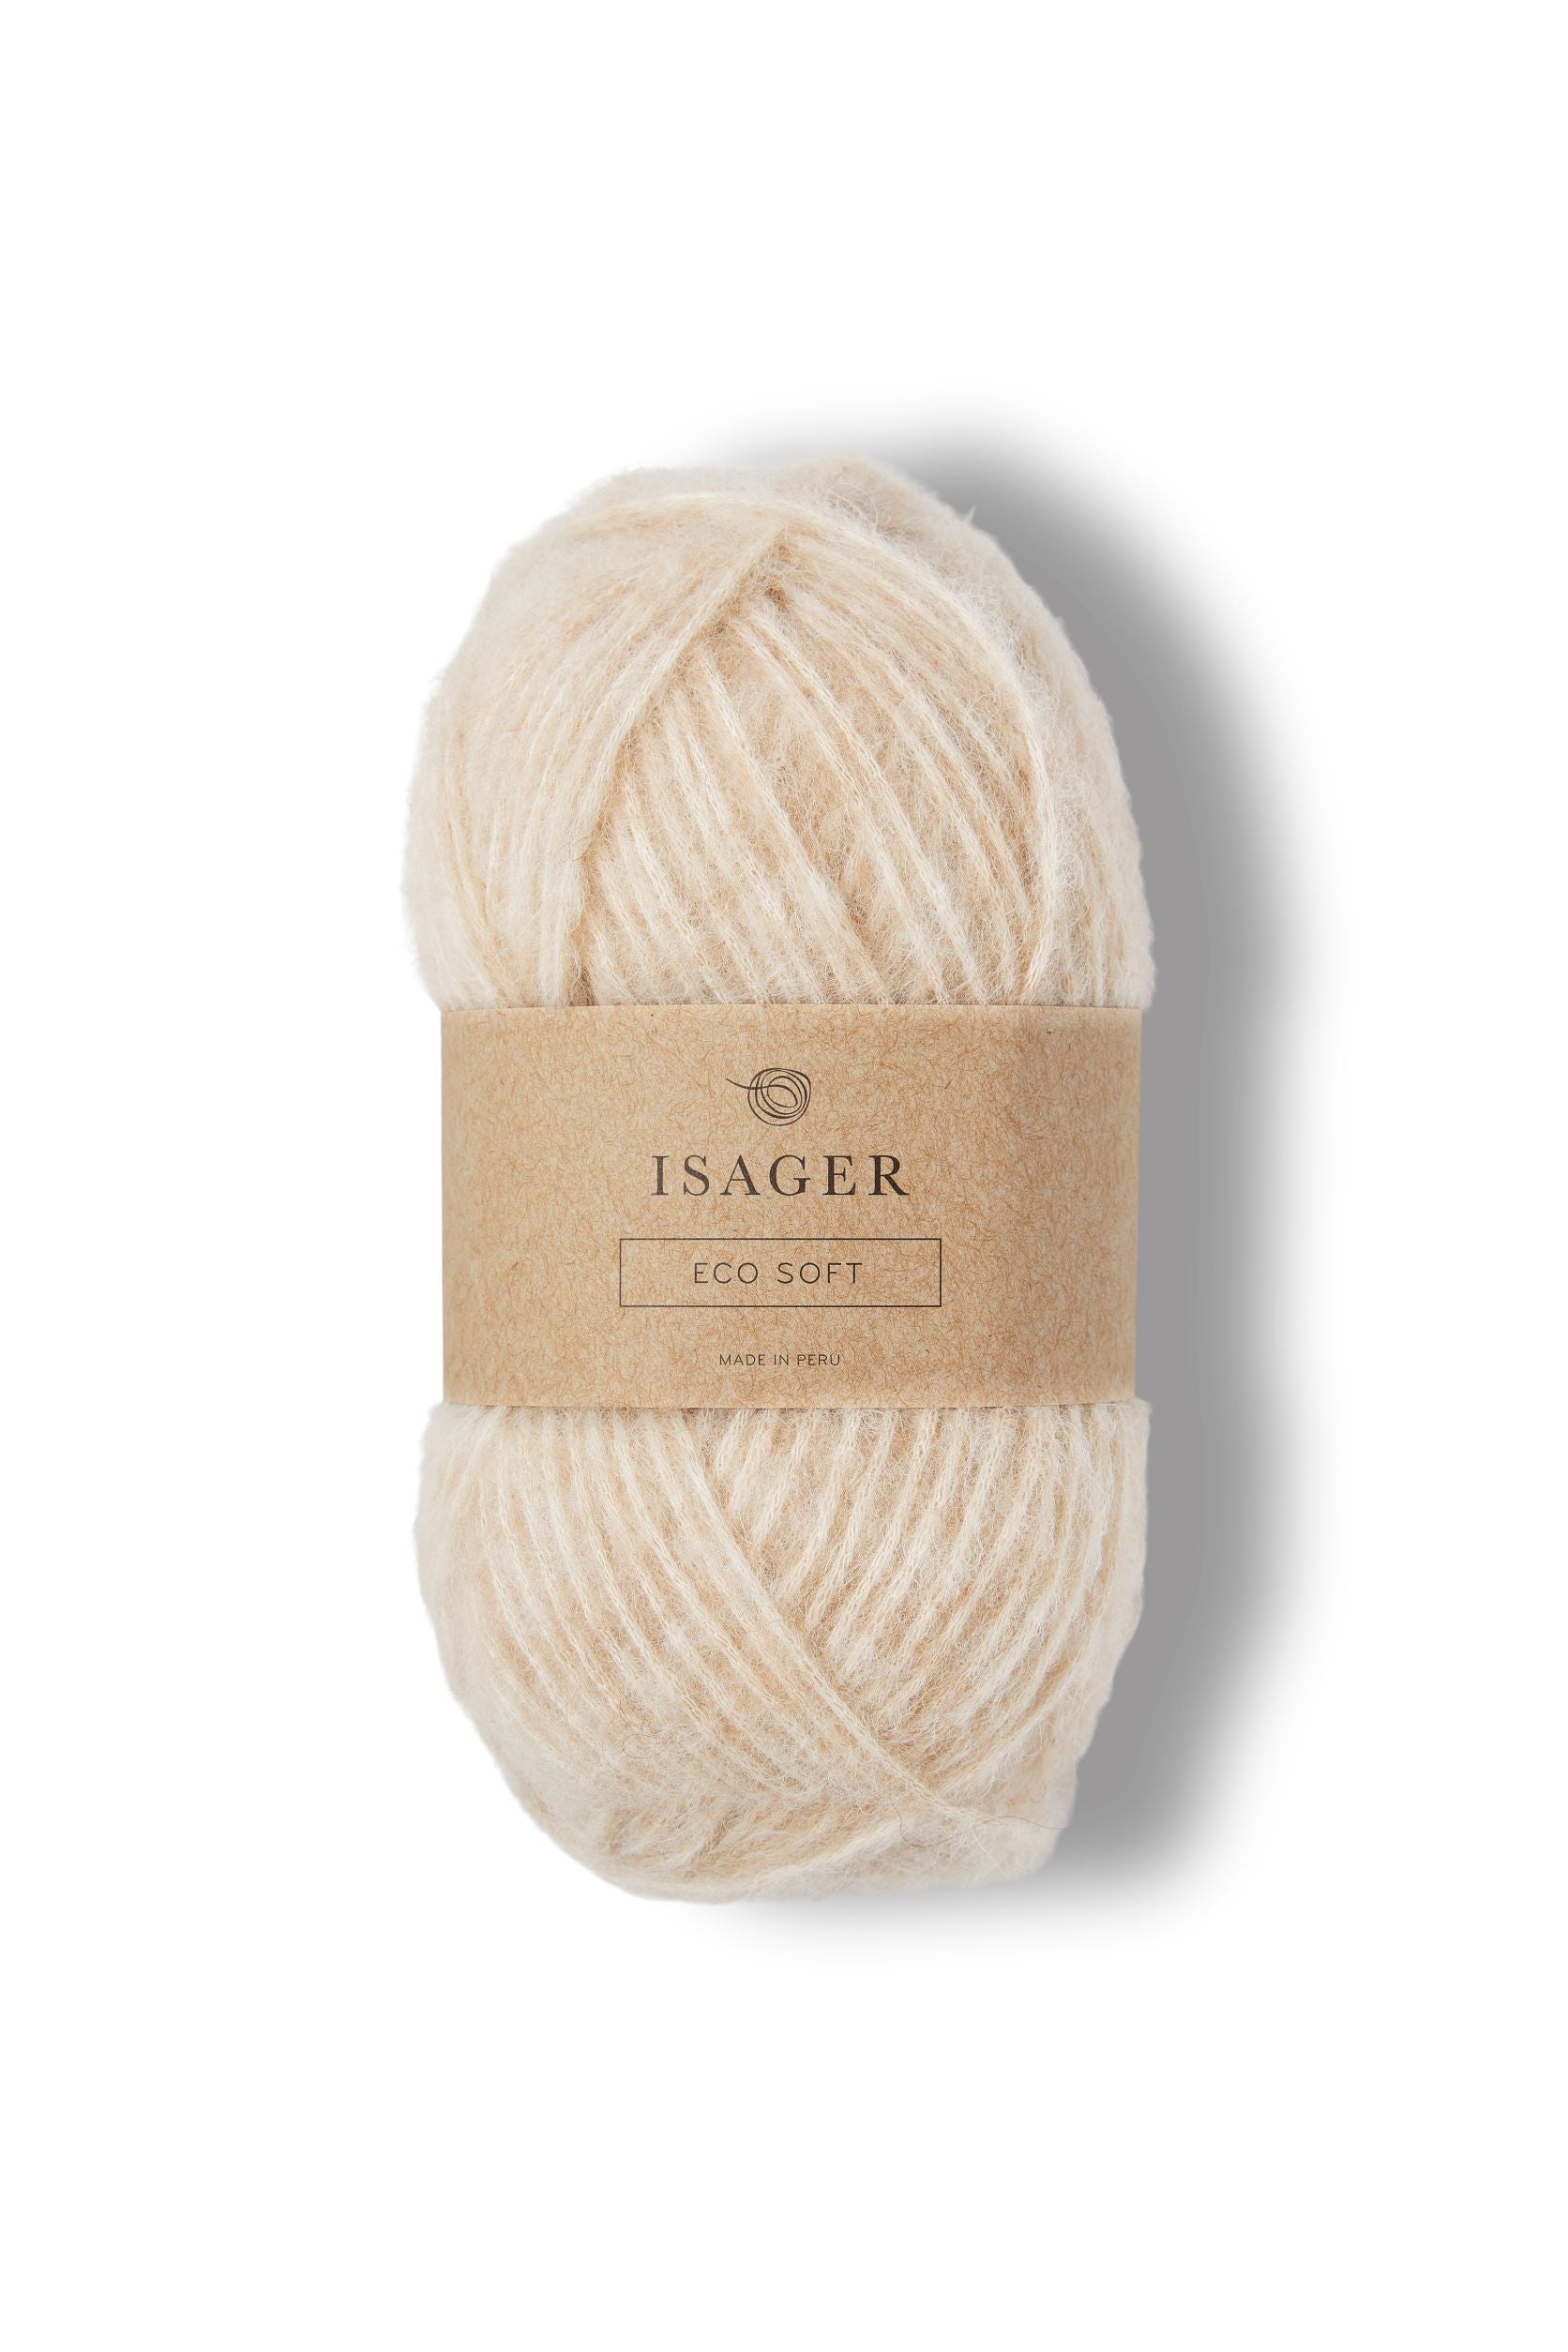 Isager ECO Soft 6s – Galore